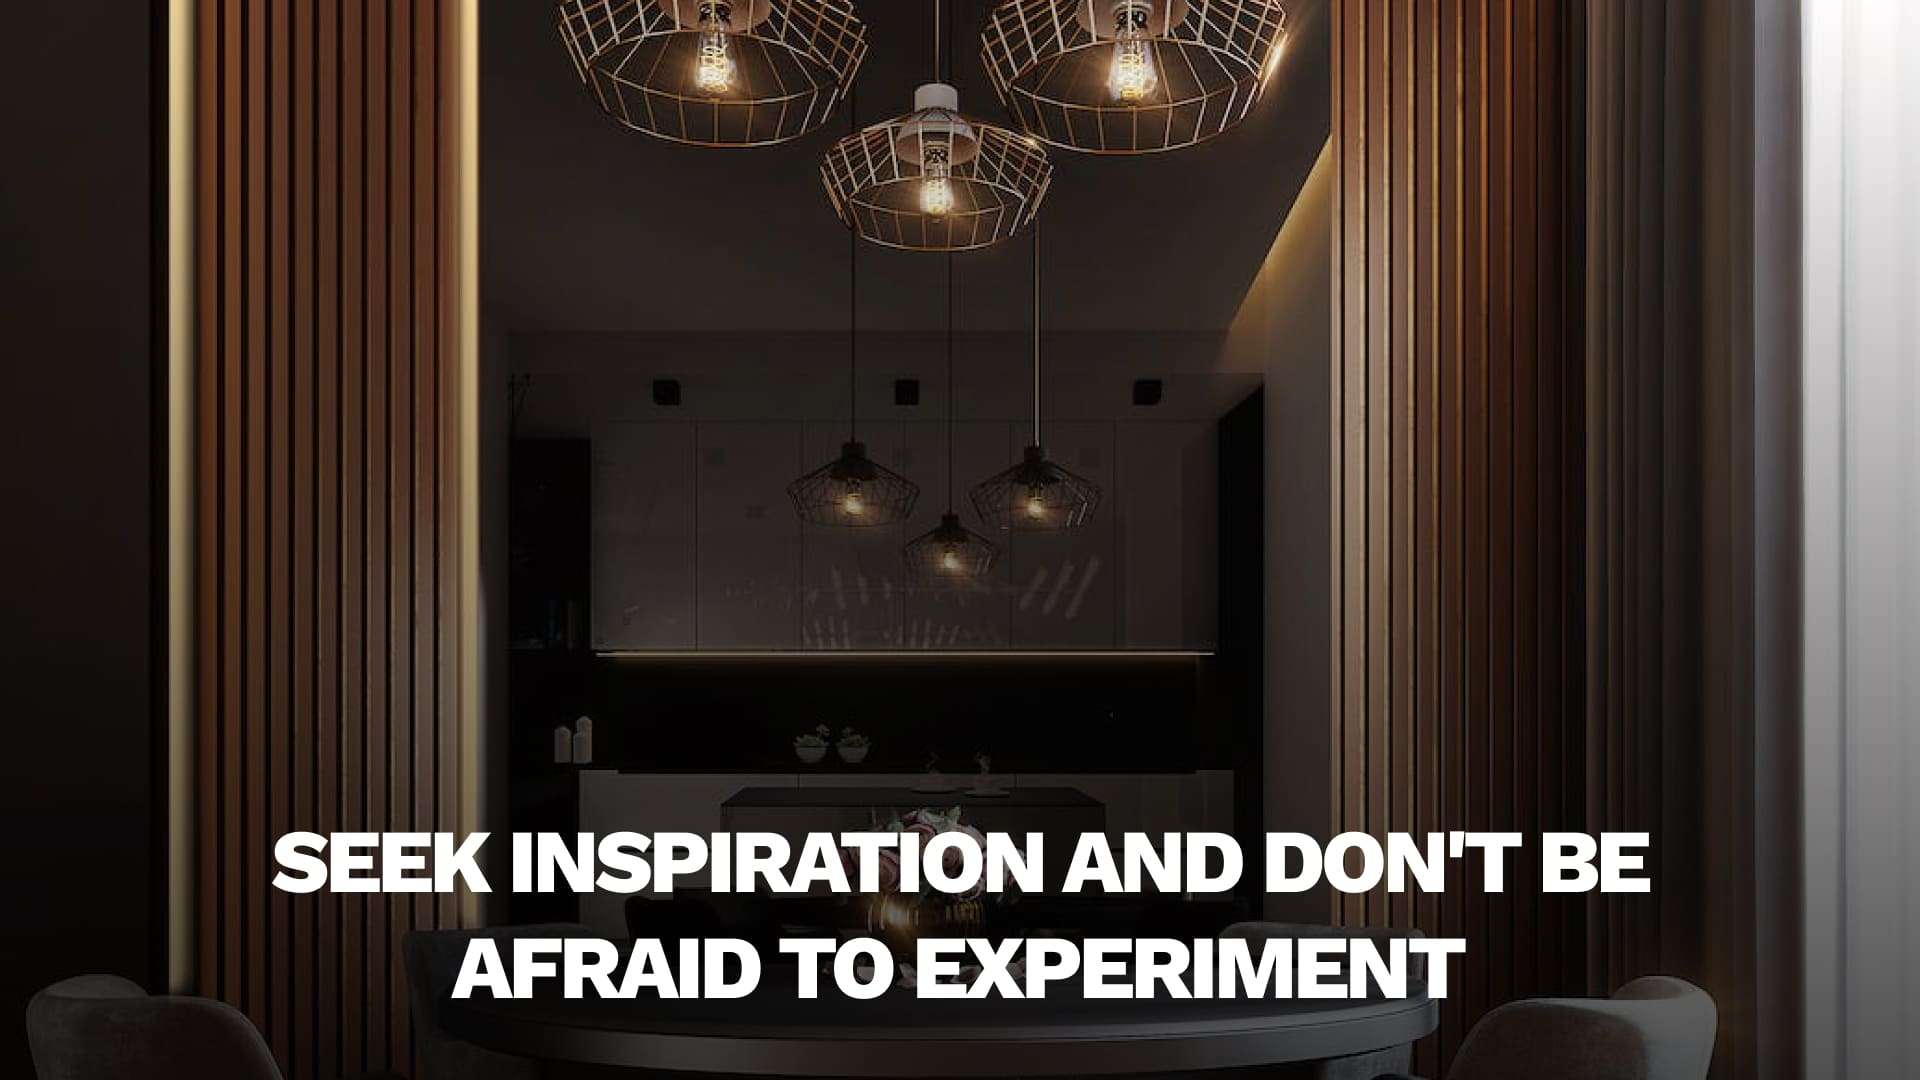 Seek inspiration and don't be afraid to experiment